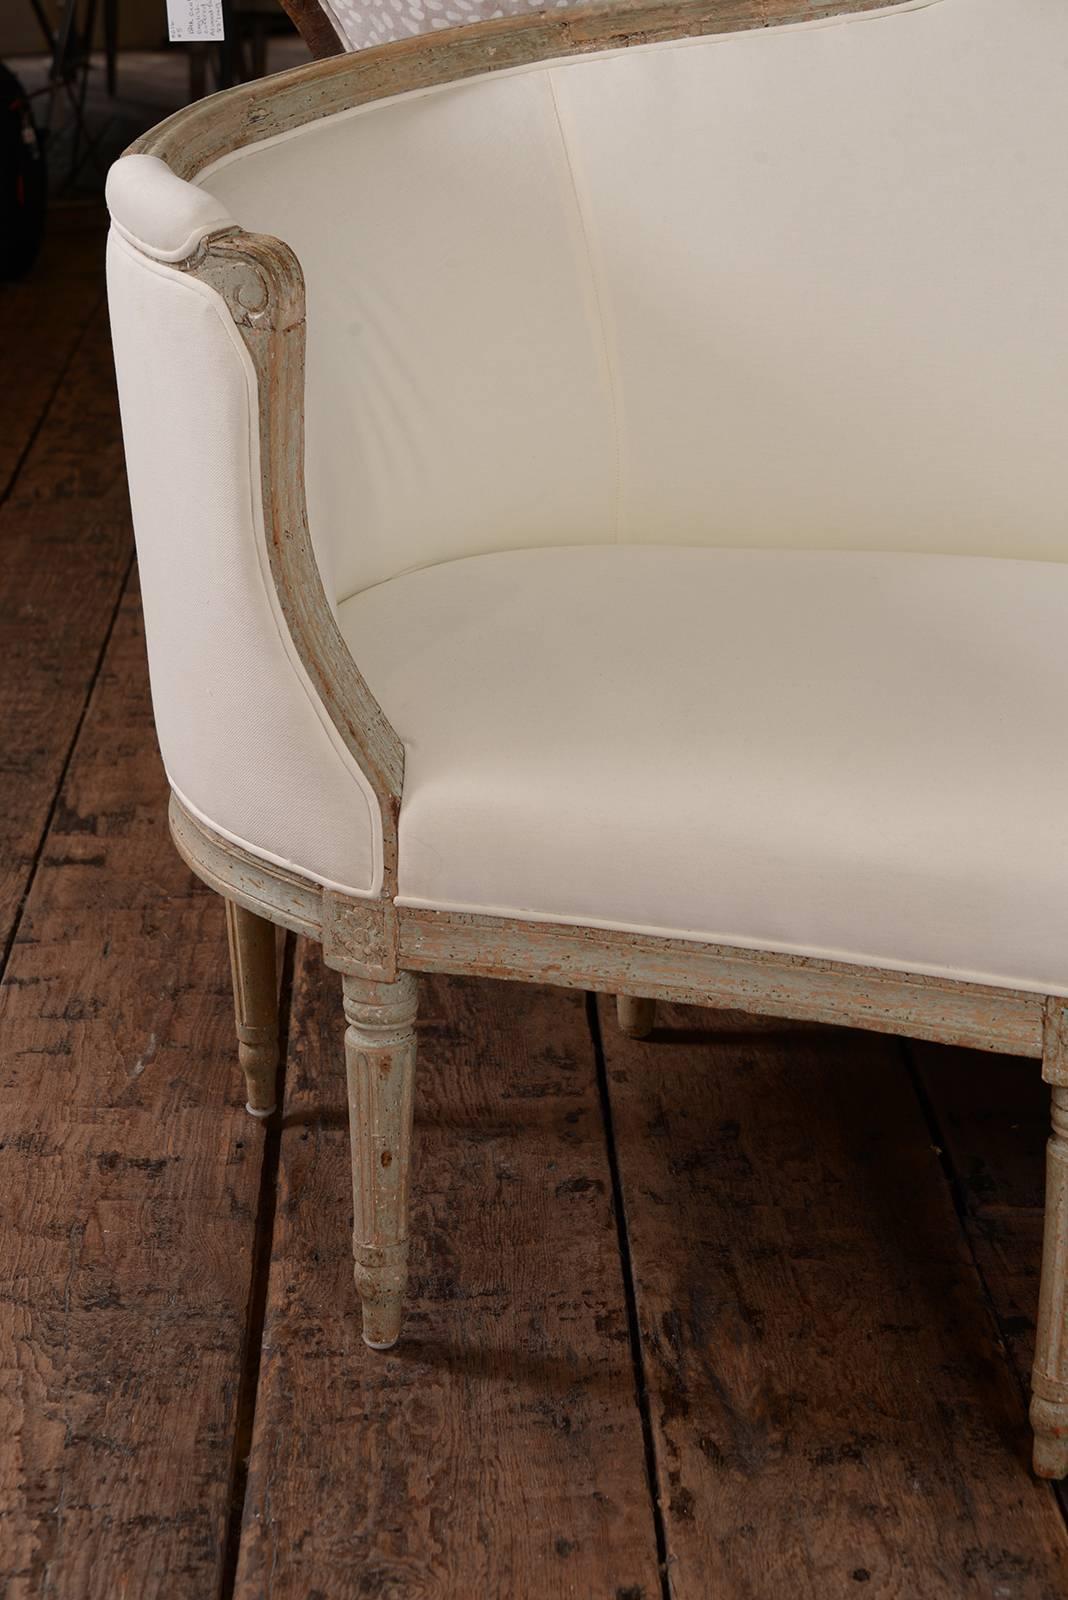 Elegant Swedish Gustavian sofa/bench upholstered in a Holland and sherry fabric, scraped to original paint.
 